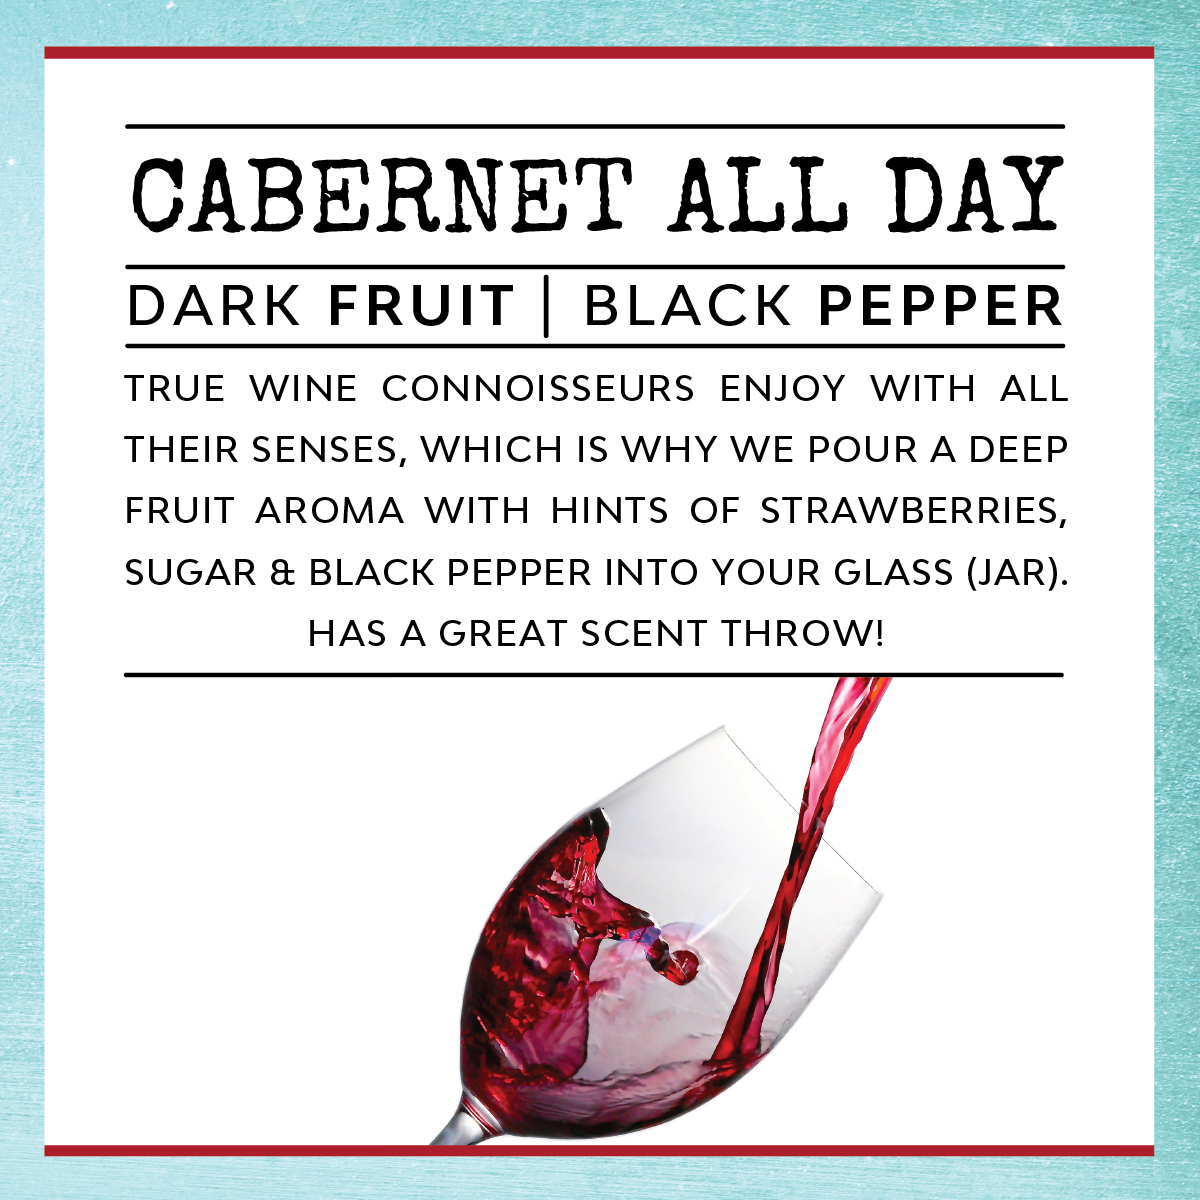 But First Wine: Cabernet All Day